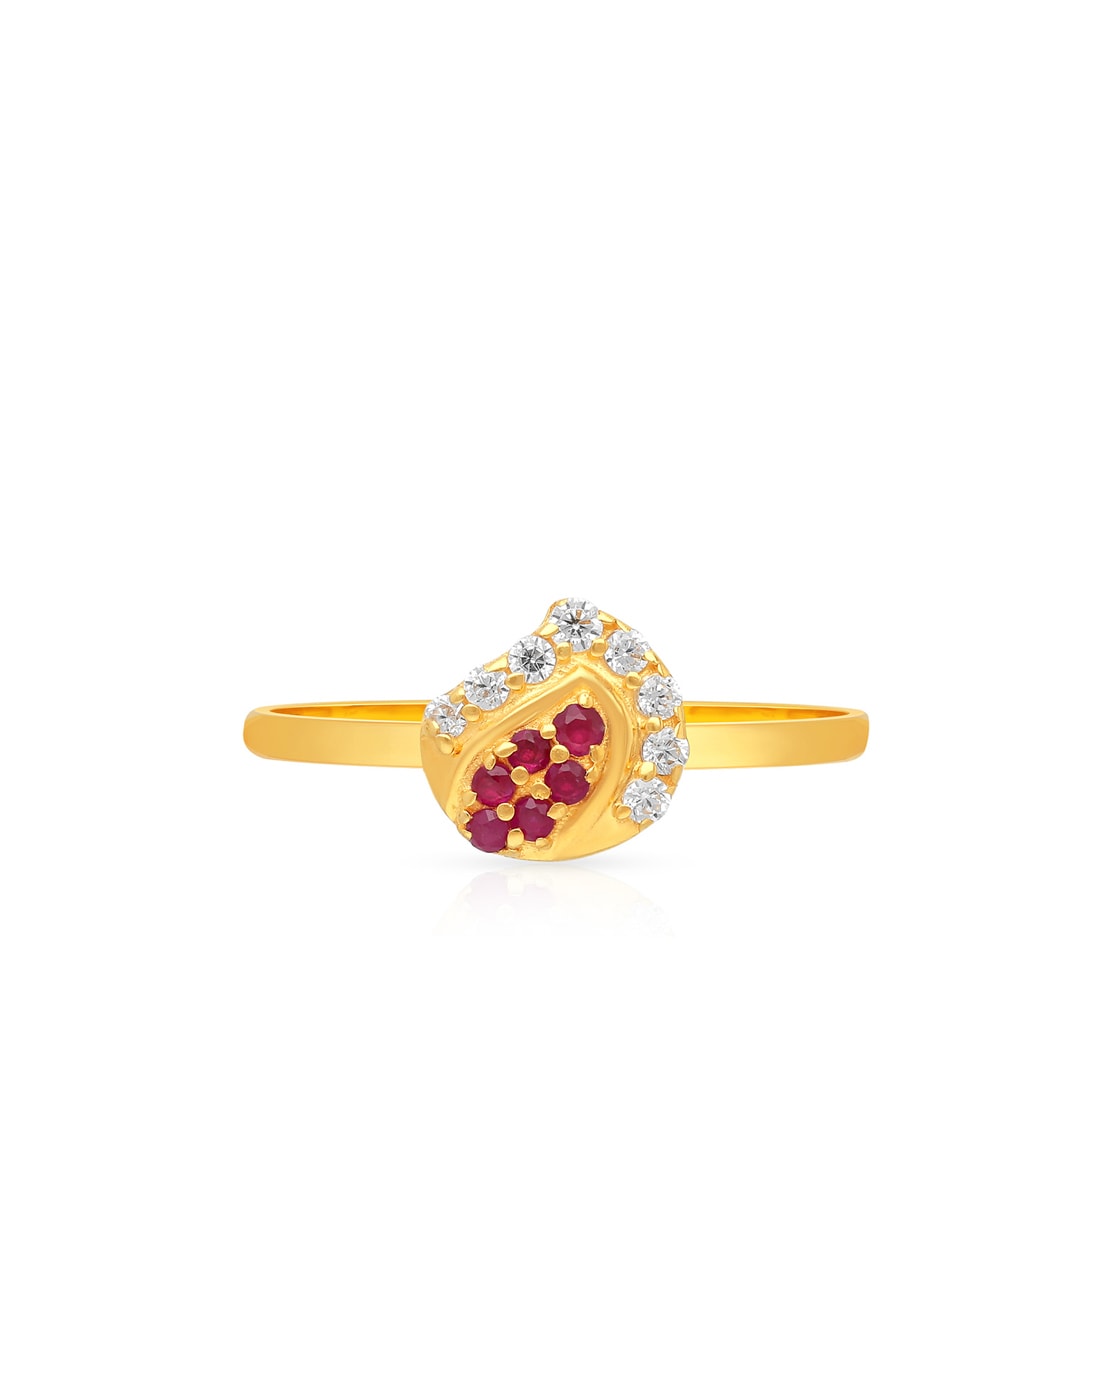 Malabar Gold & Diamonds 22K Yellow Gold Ruby and Emerald Precia Gemstone  Fashion Ring, 6 US - A111000248881: Buy Online at Best Price in UAE -  Amazon.ae